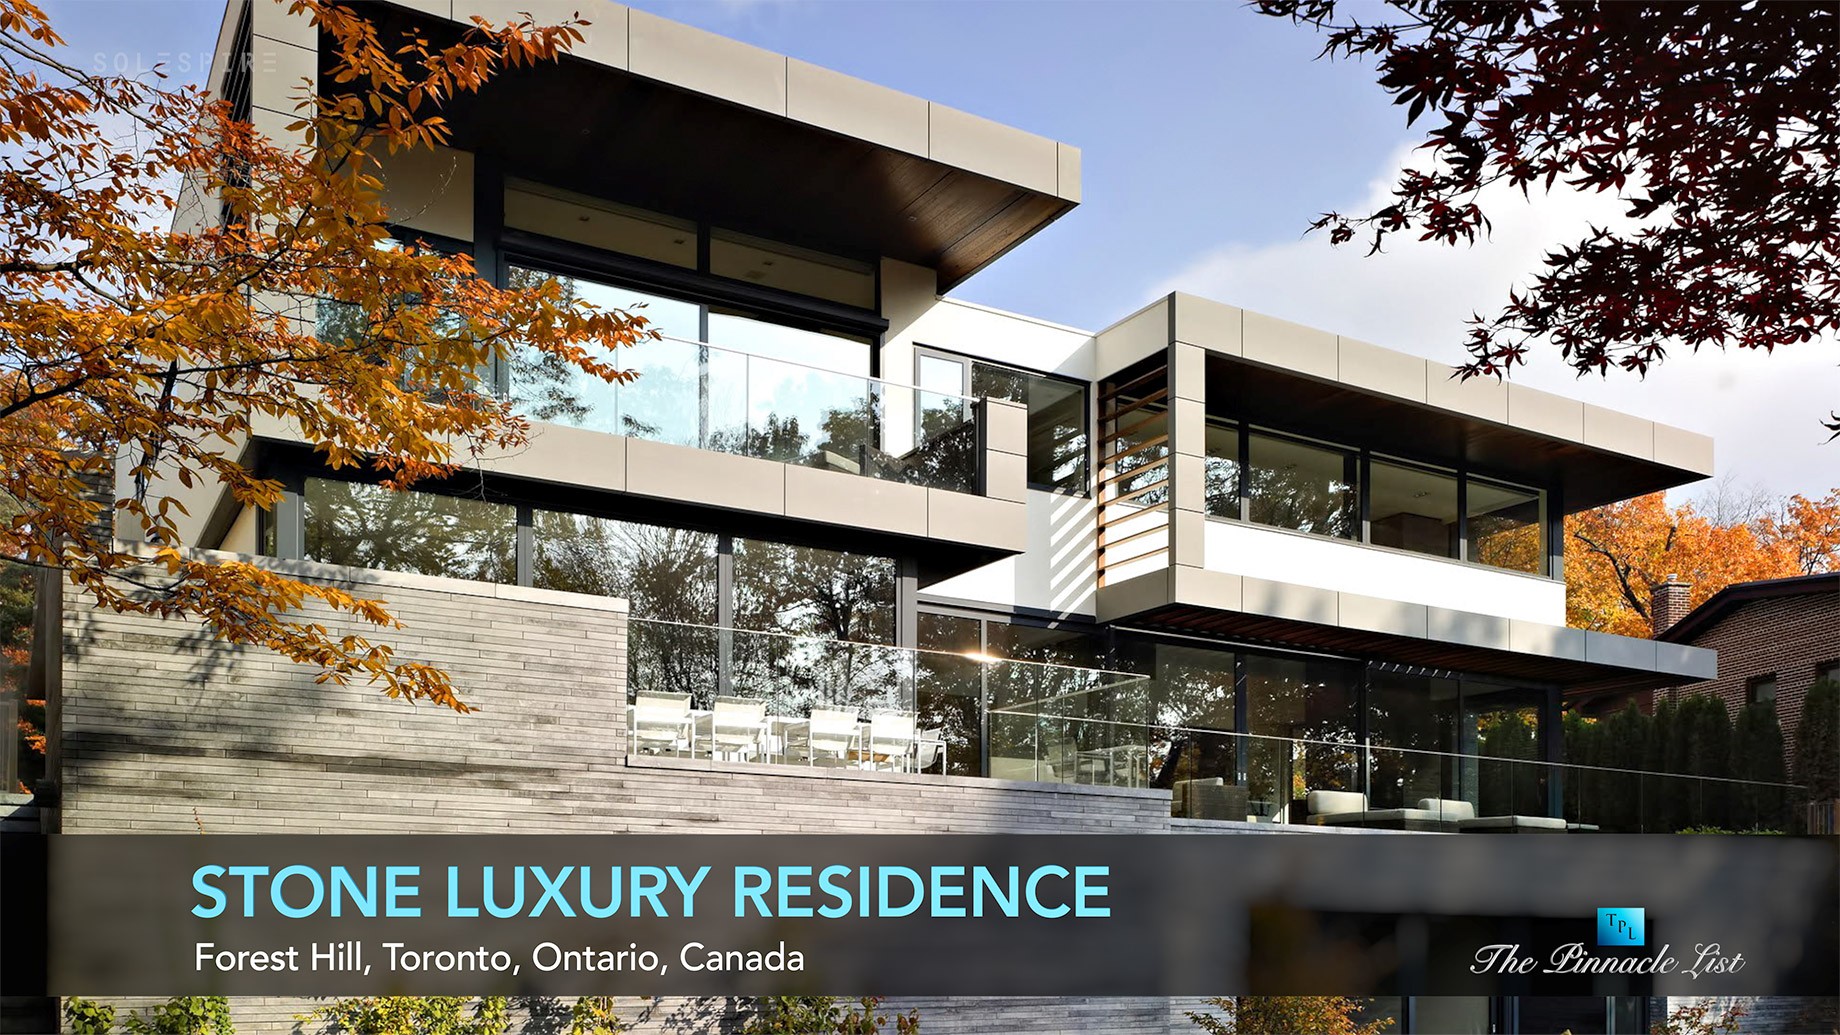 Luxury Home Design - Stone Residence - Forest Hill, Toronto, ON, Canada - Luxury Real Estate